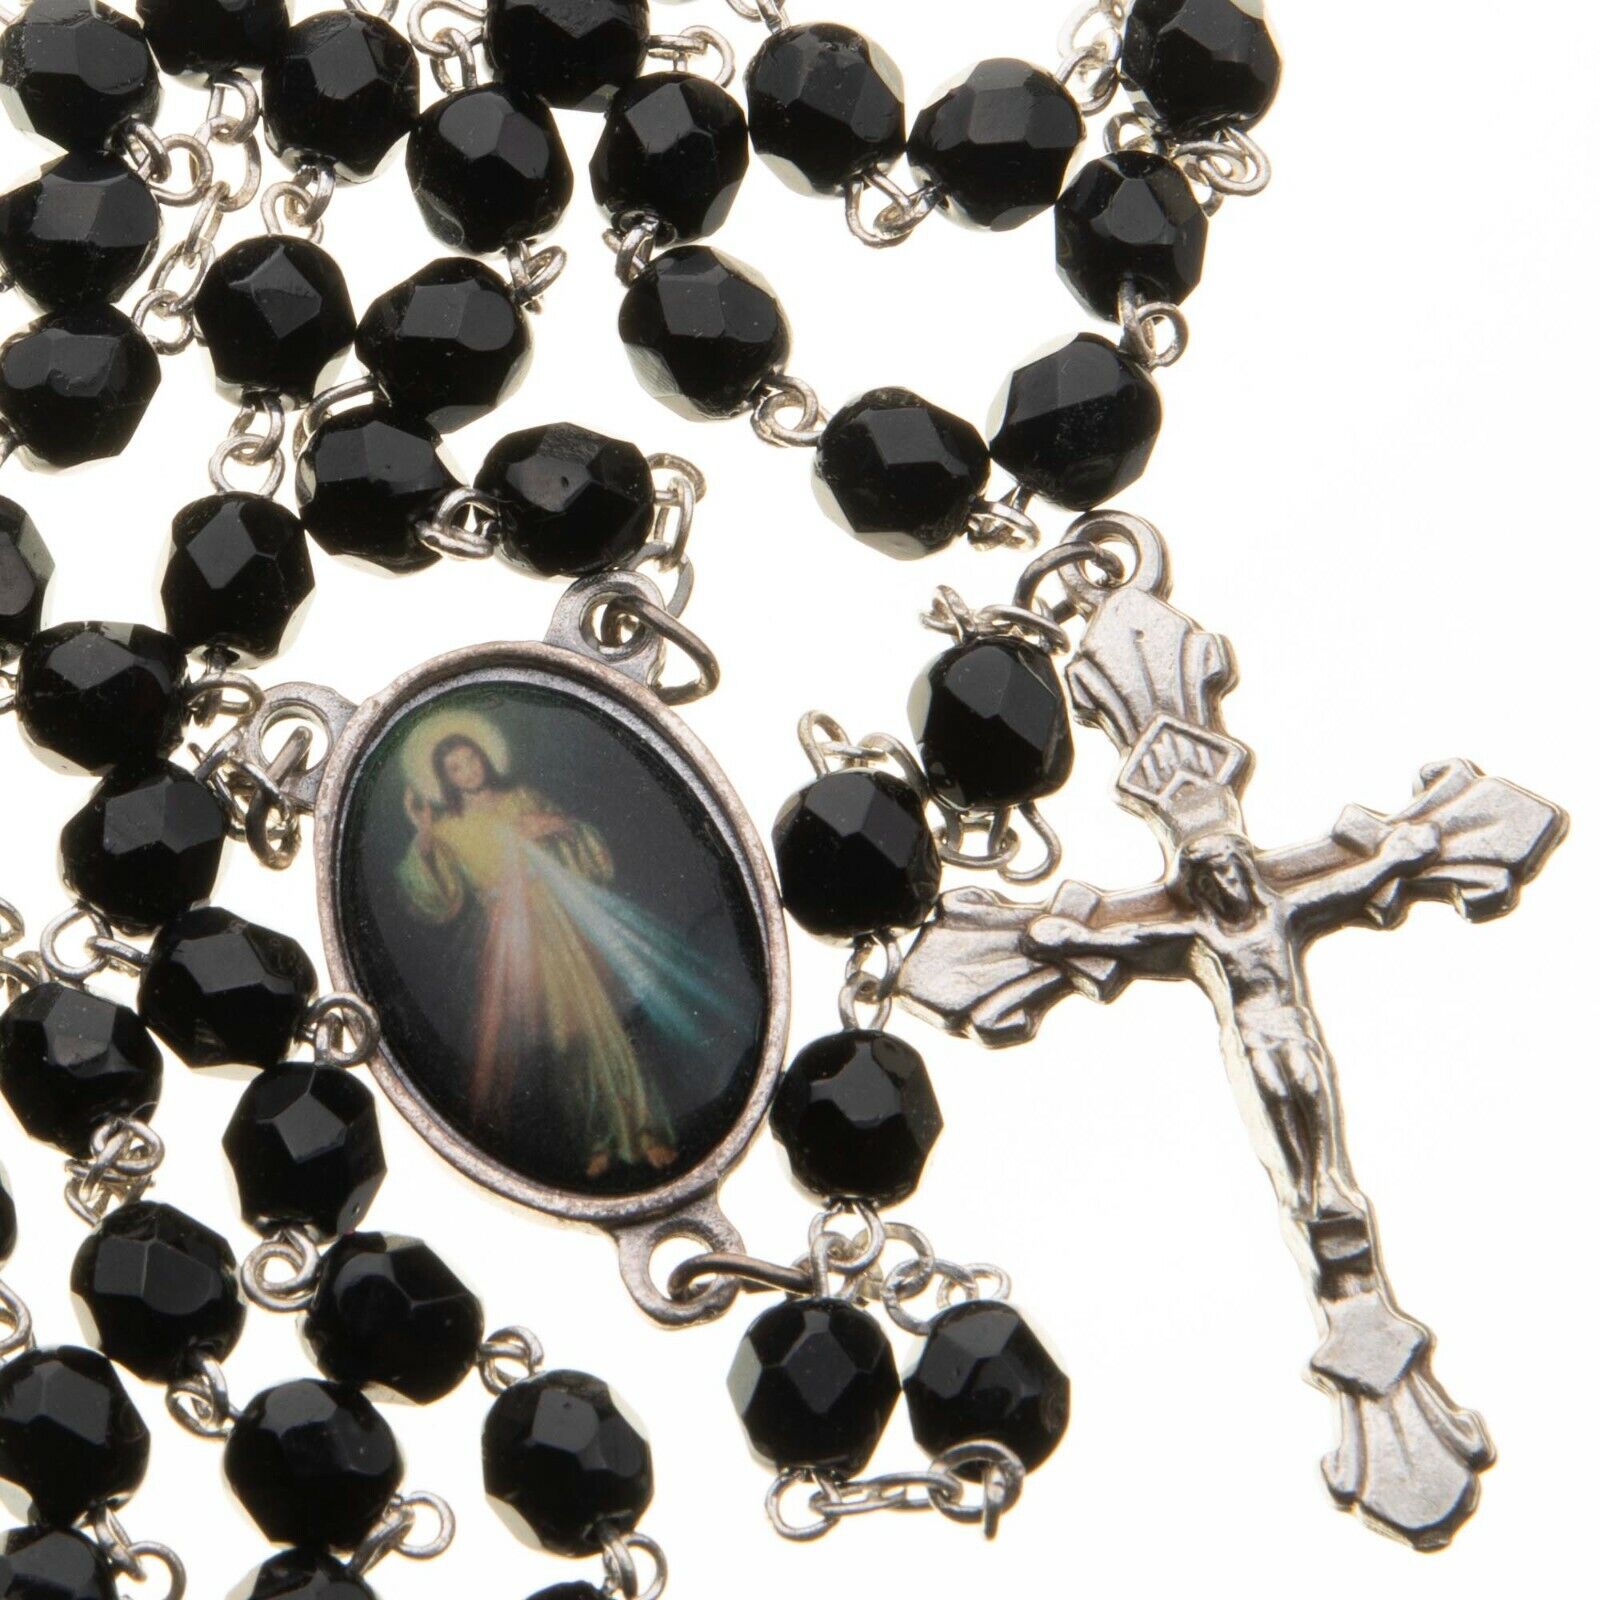 Divine Mercy Catholic Rosary Beads Black Faceted Glass Women Men 7mm Italy